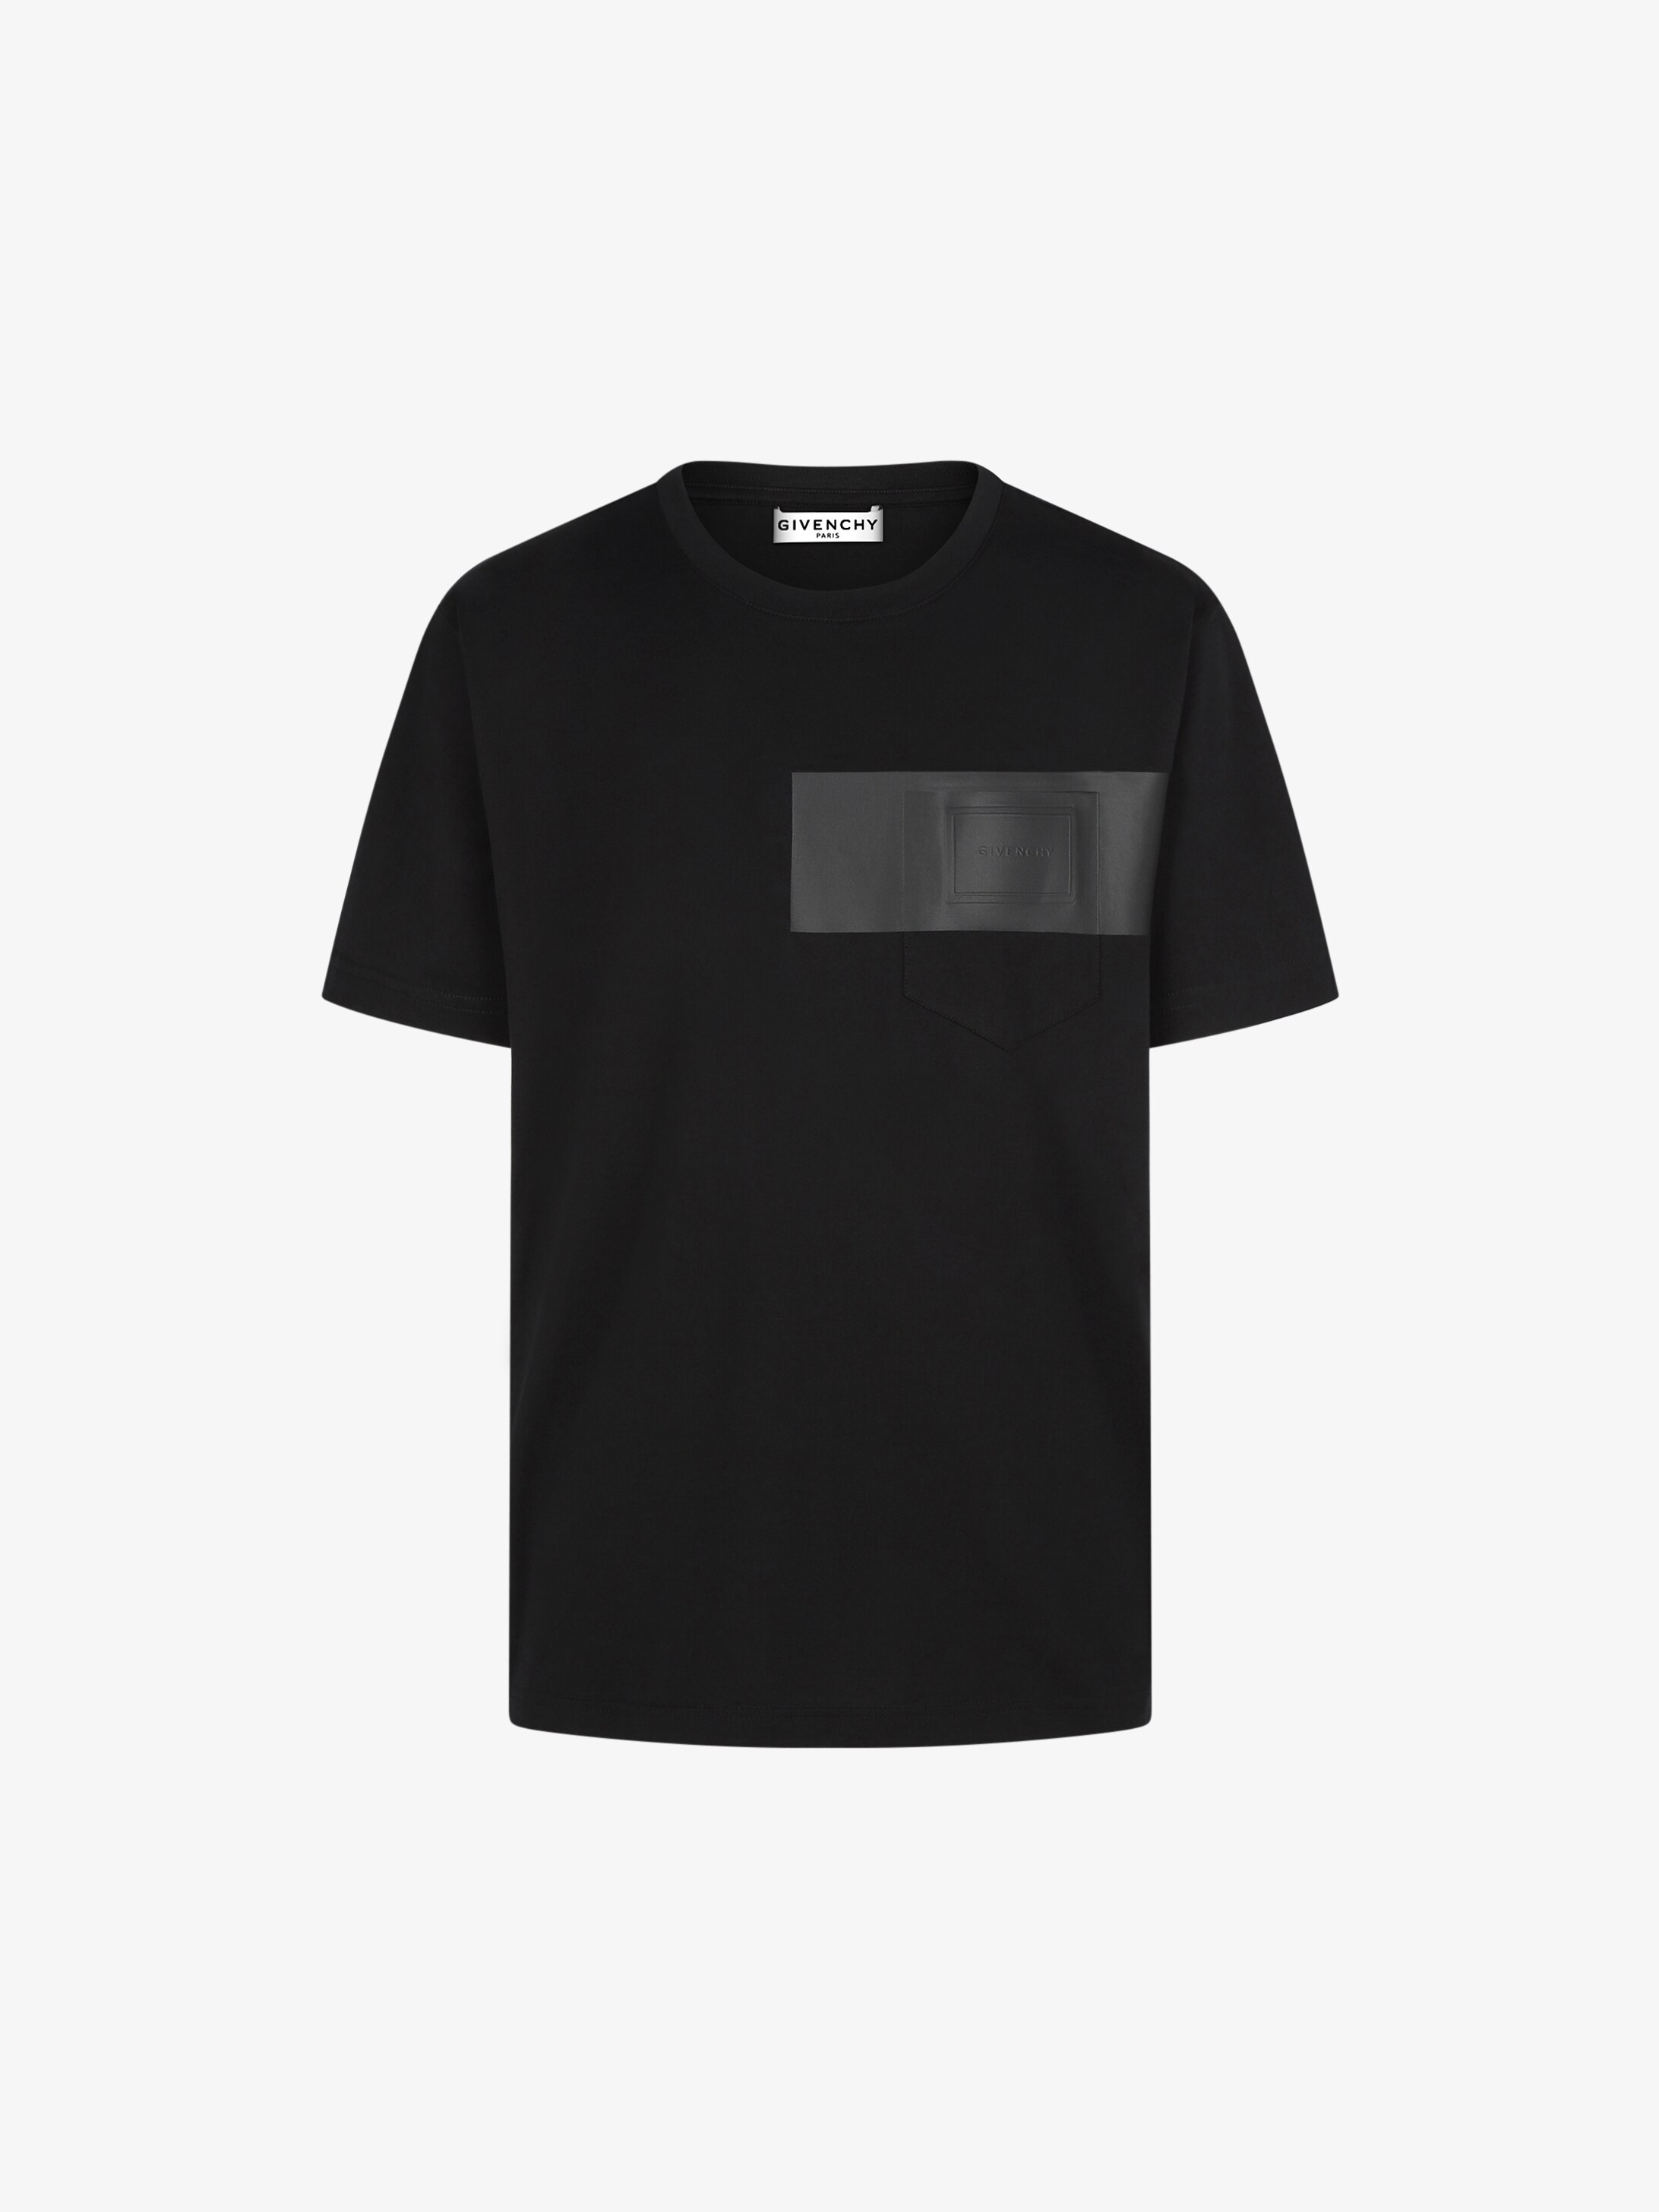 GIVENCHY t-shirt with patch | GIVENCHY 